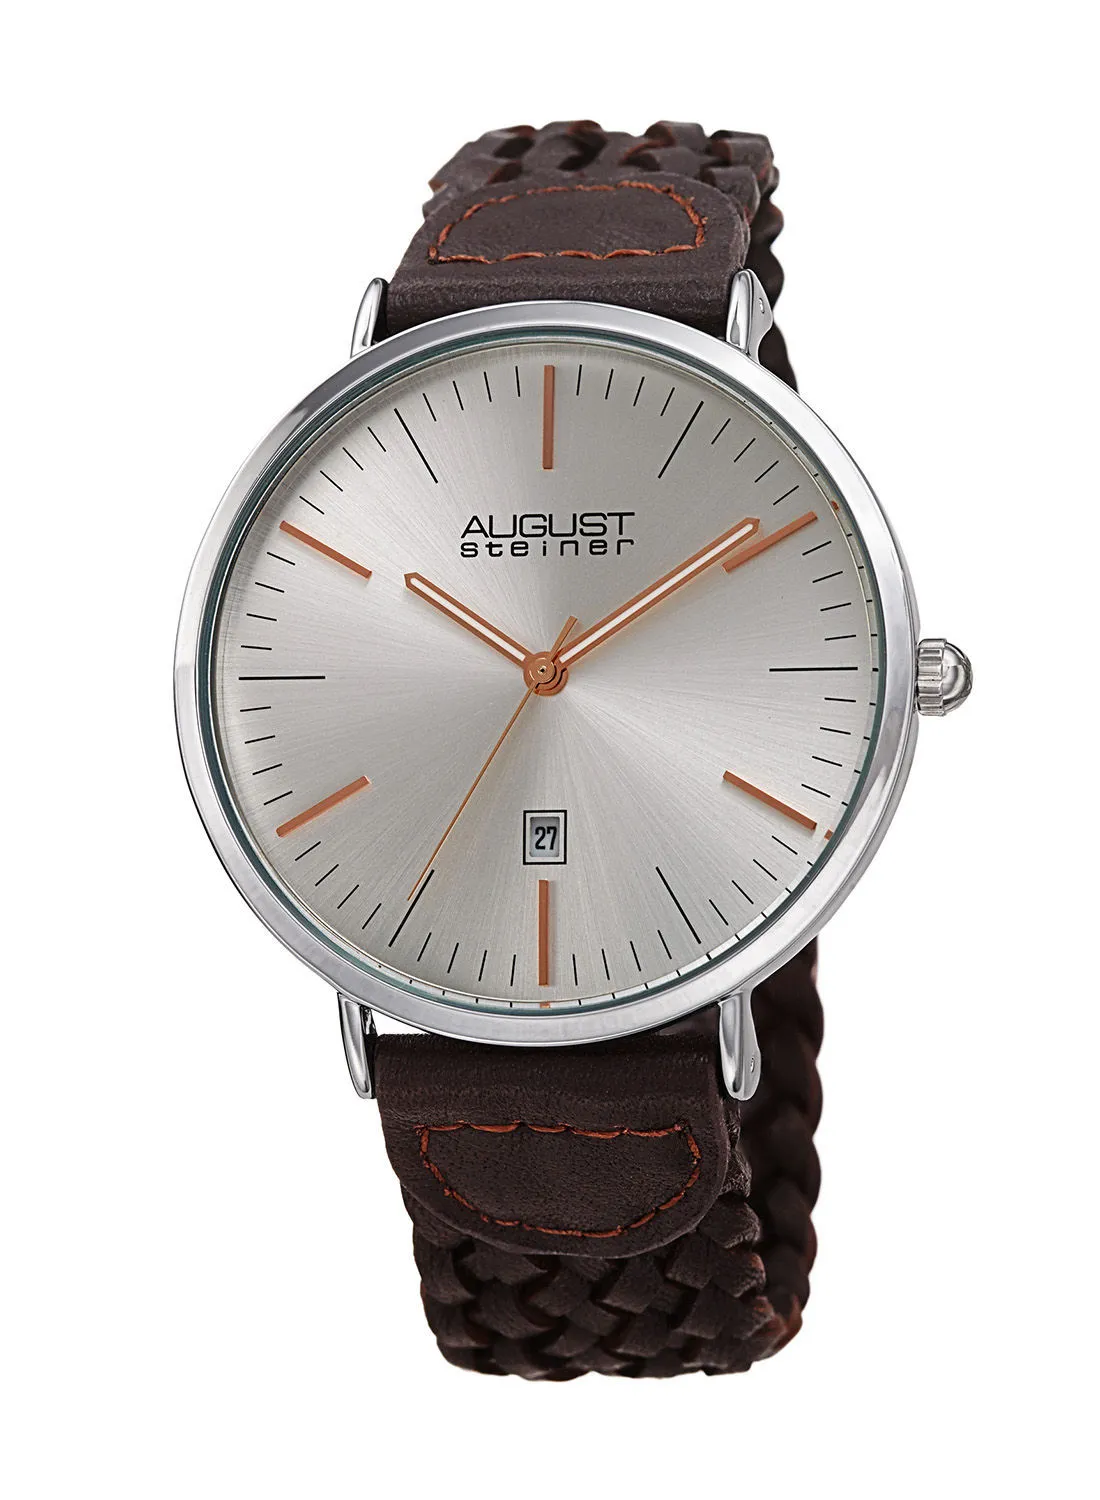 August Steiner Ion Plated Silver Tone Case, Silver Dial, on a Brown Genuine Leather Braided Strap